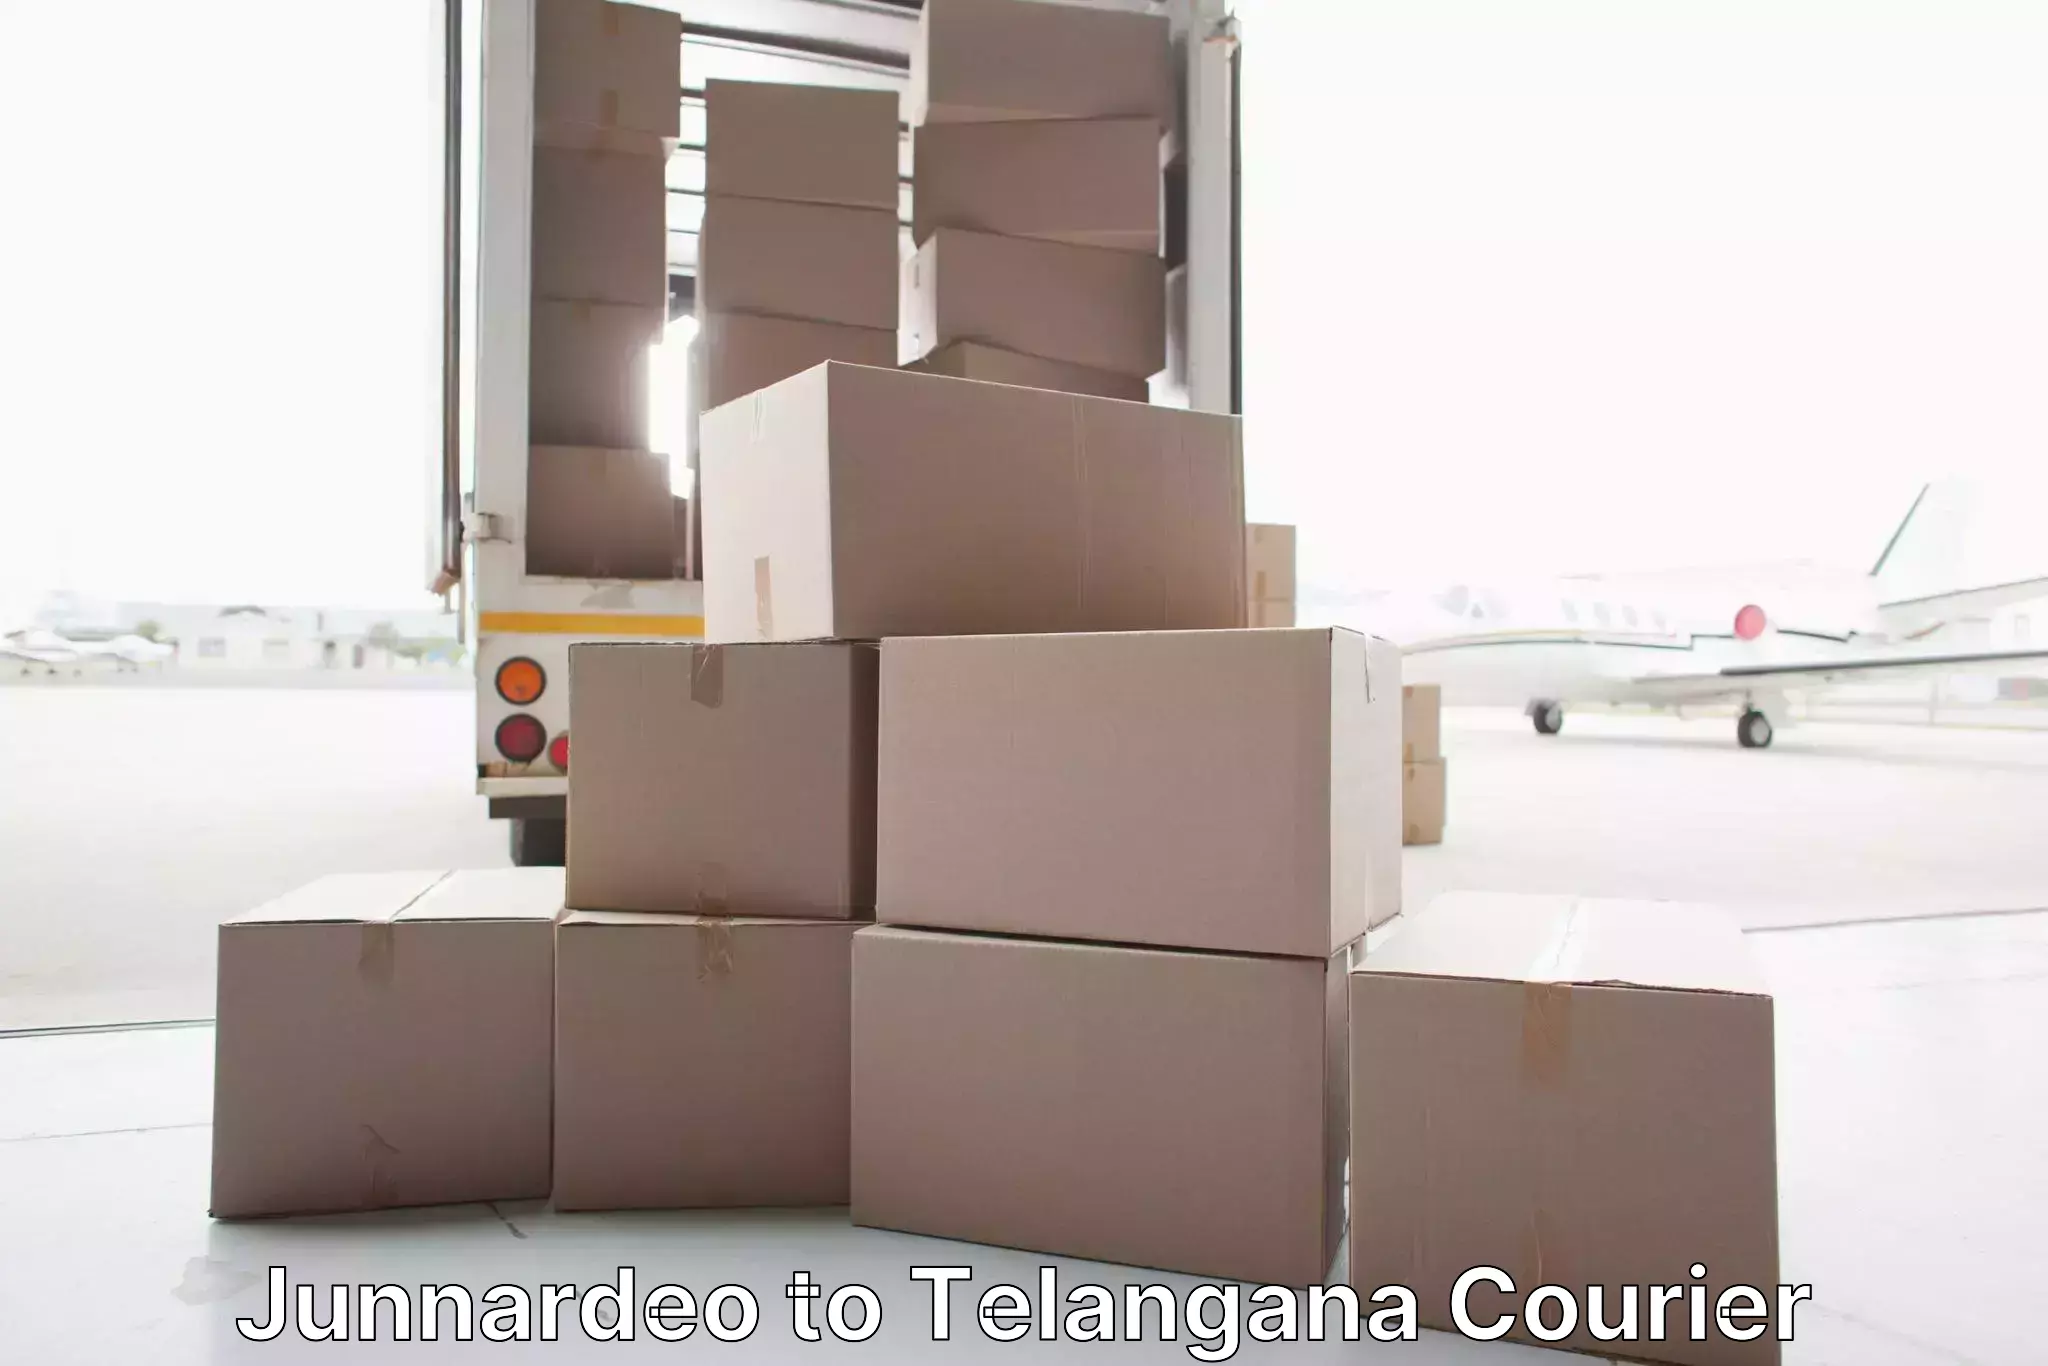 Efficient home goods movers in Junnardeo to Telangana